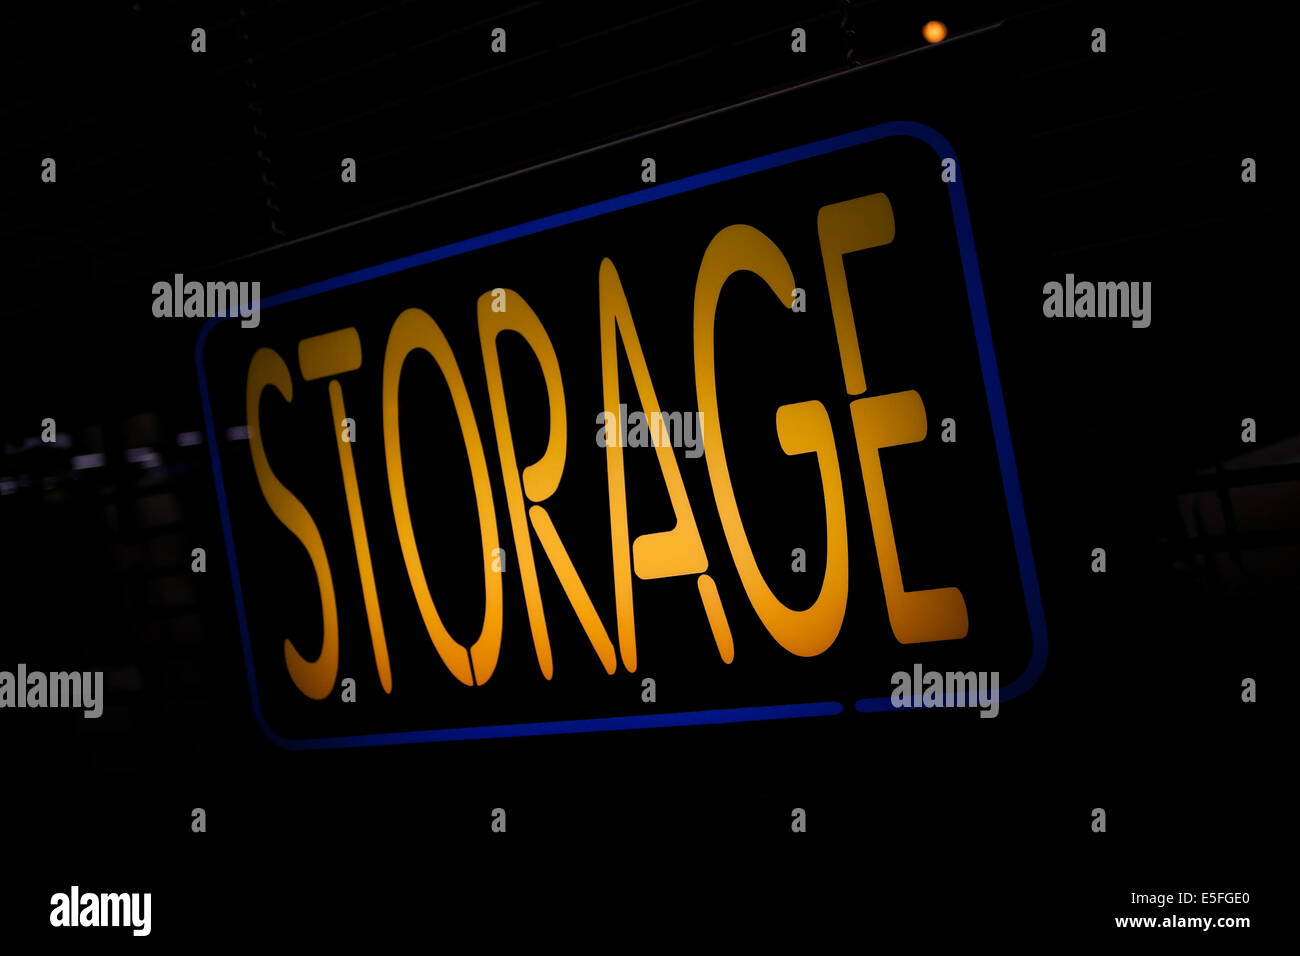 Neon Sign Storage on the Black Background Stock Photo